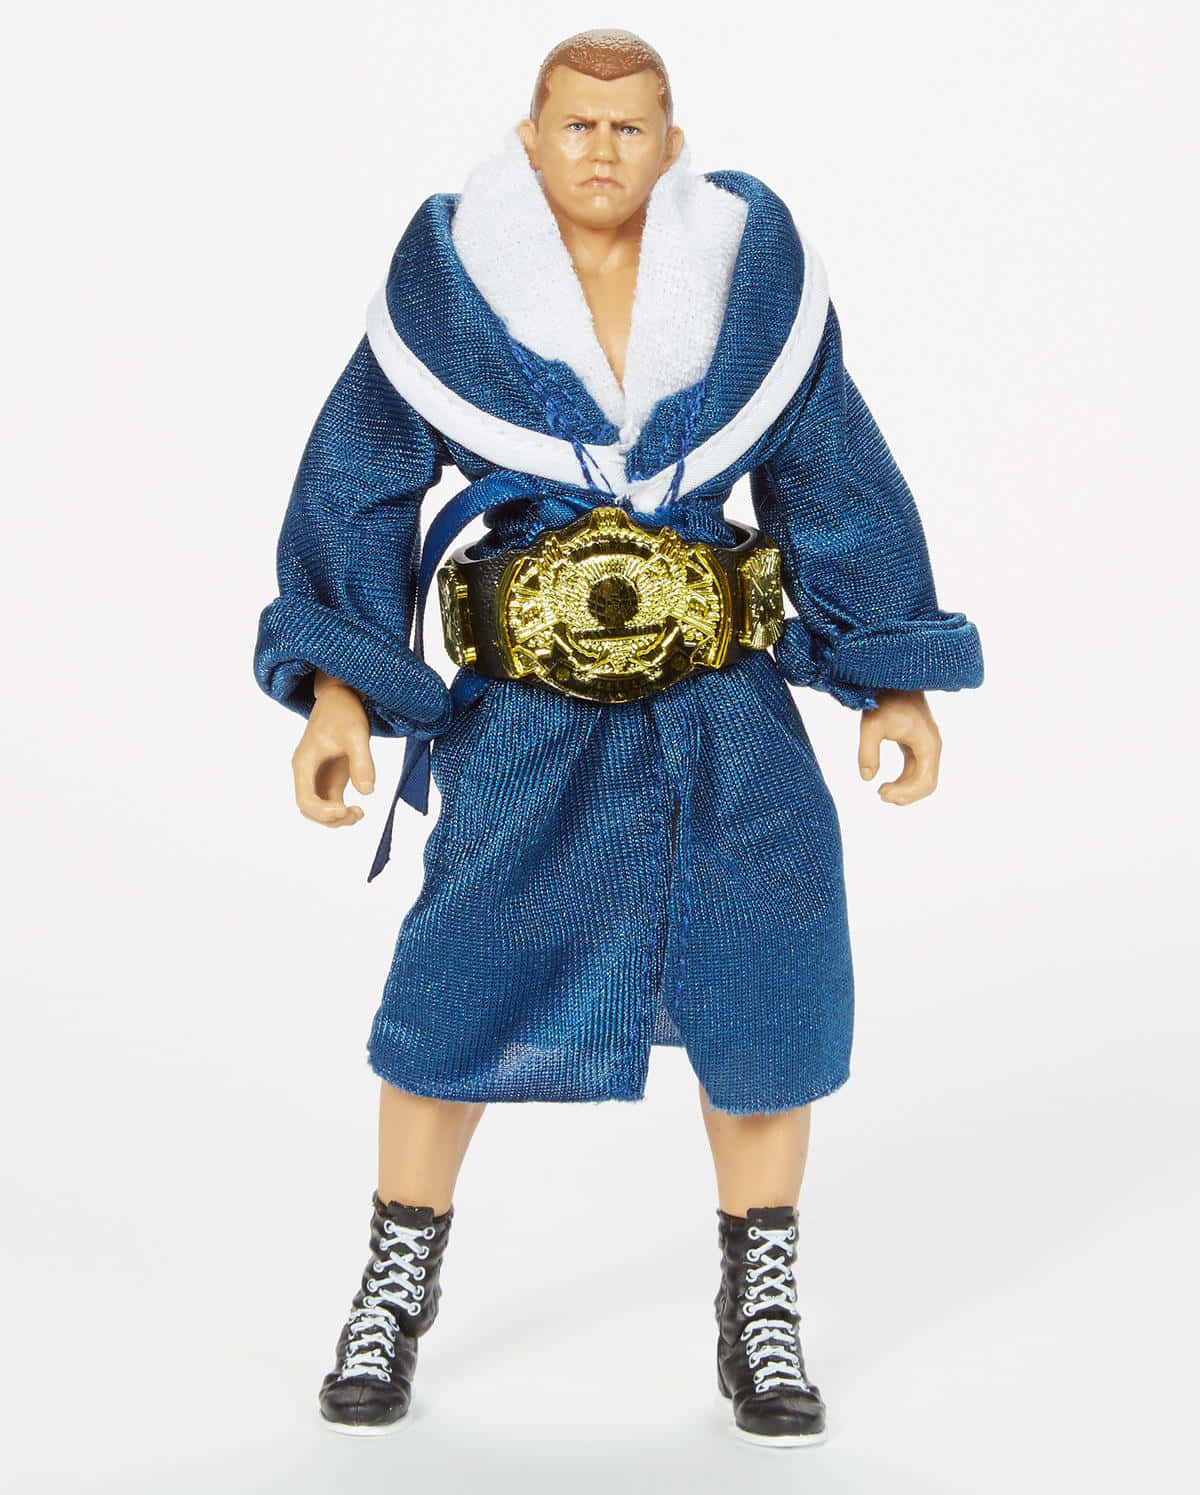 Bob Backlund Wwe Elite Collector's Edition Wrestling Figure. (in Swedish, We Would Simply Say The Name: 